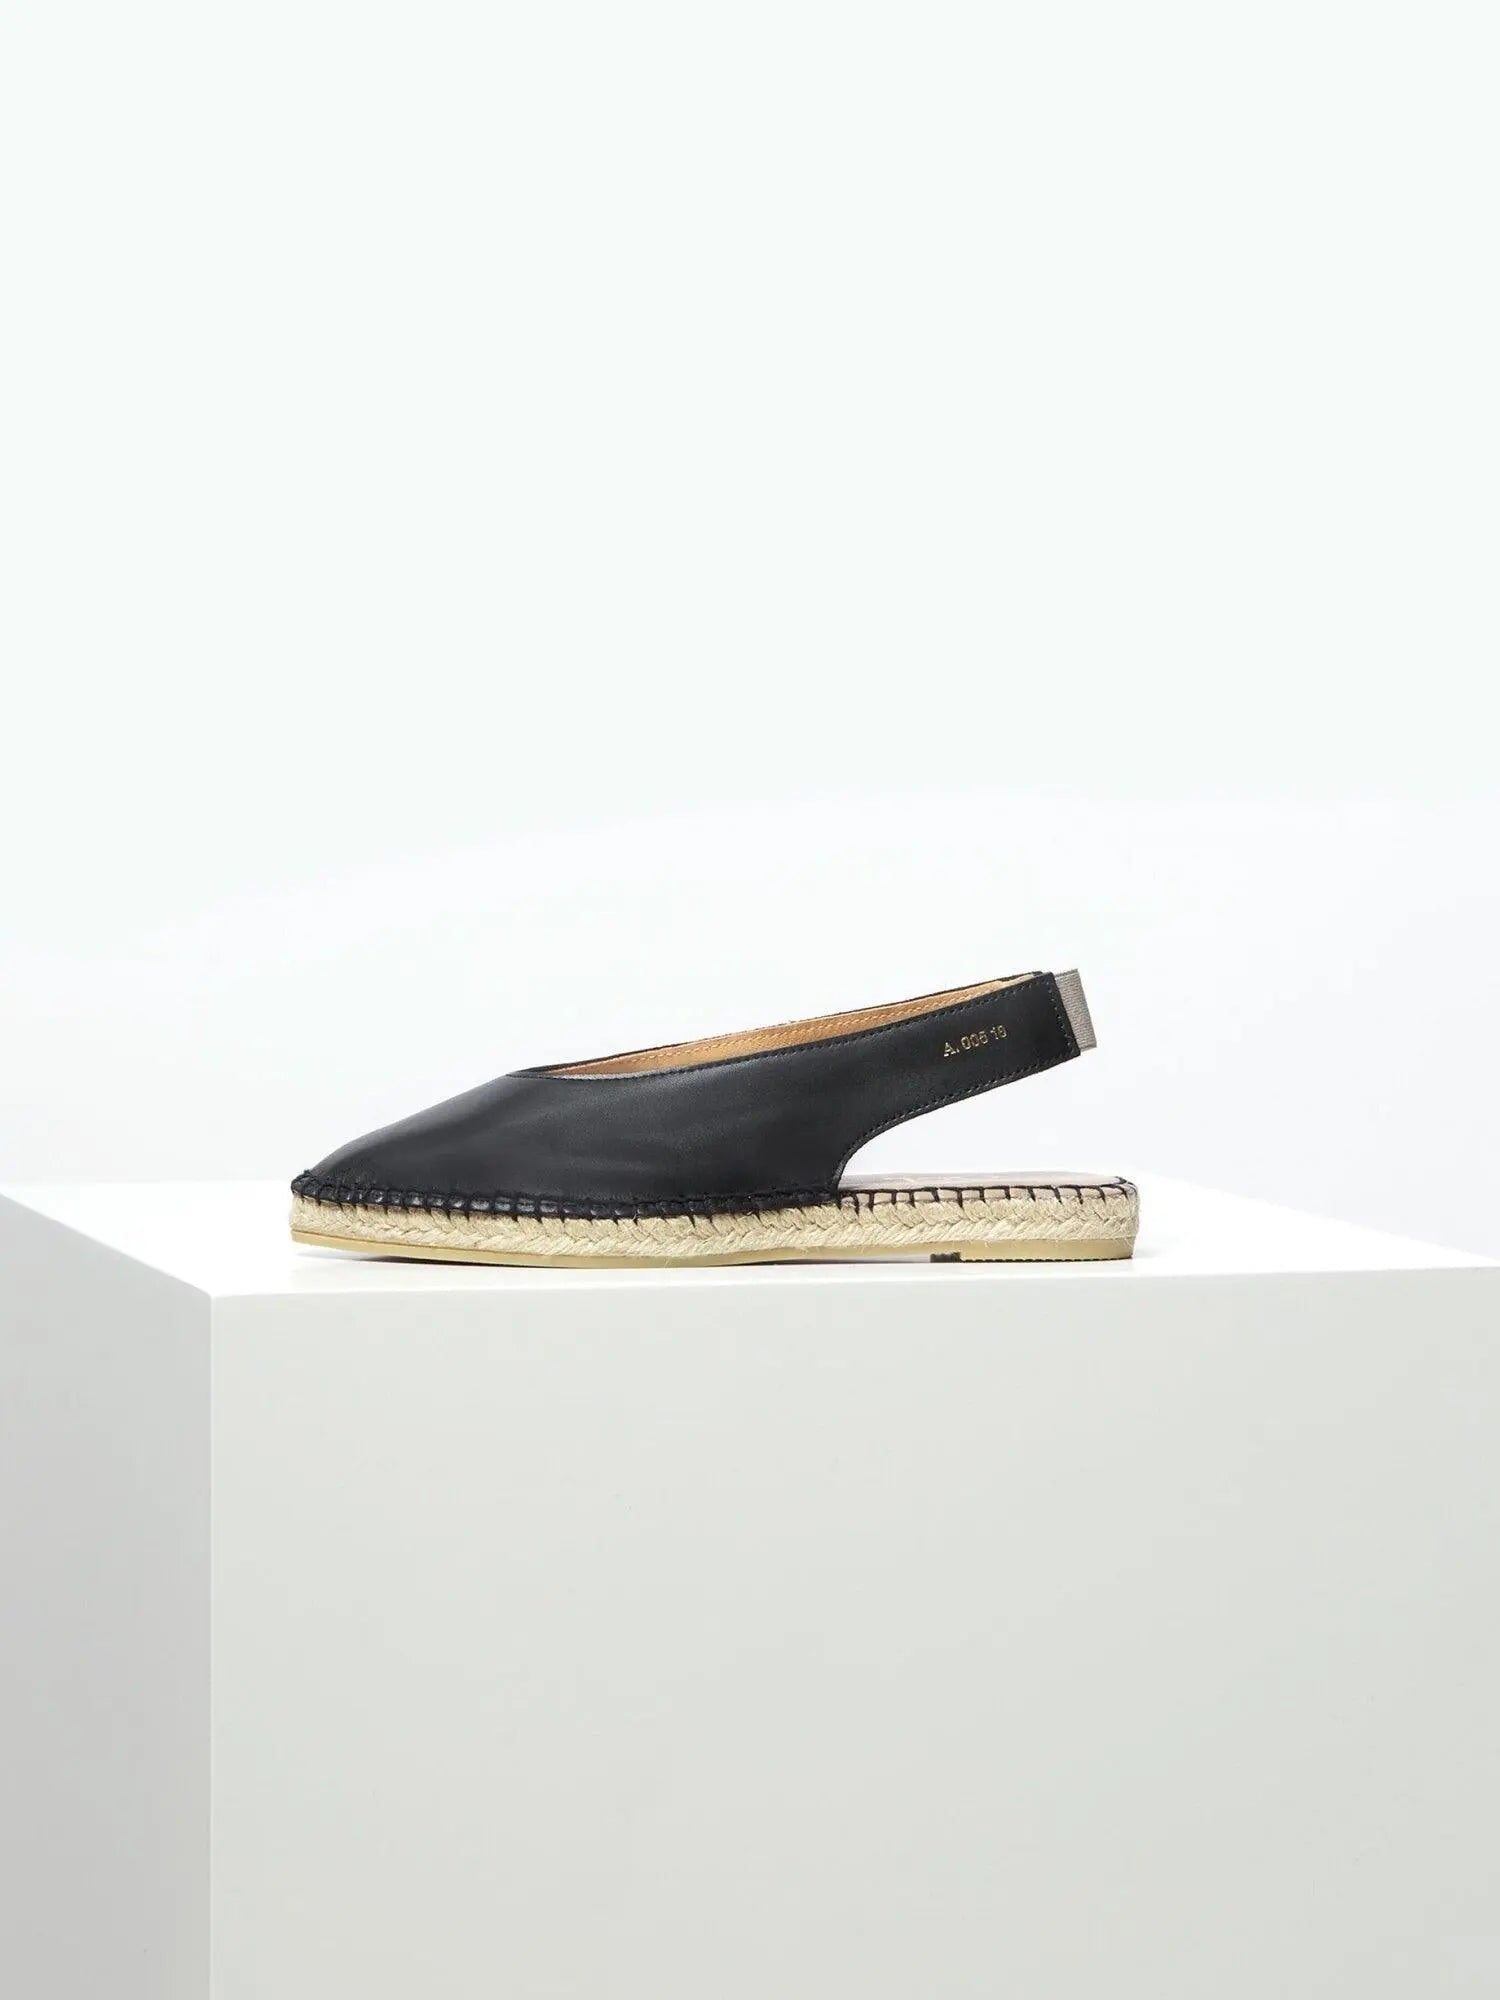 A single Ulvik Black Leather Espadrille with an open back and a beige woven jute sole is displayed on a white geometric pedestal against a plain white background. The shoe, marked "Act Series" near the heel, epitomizes the chic style found in Barcelona's trendiest stores like Bassalstore.